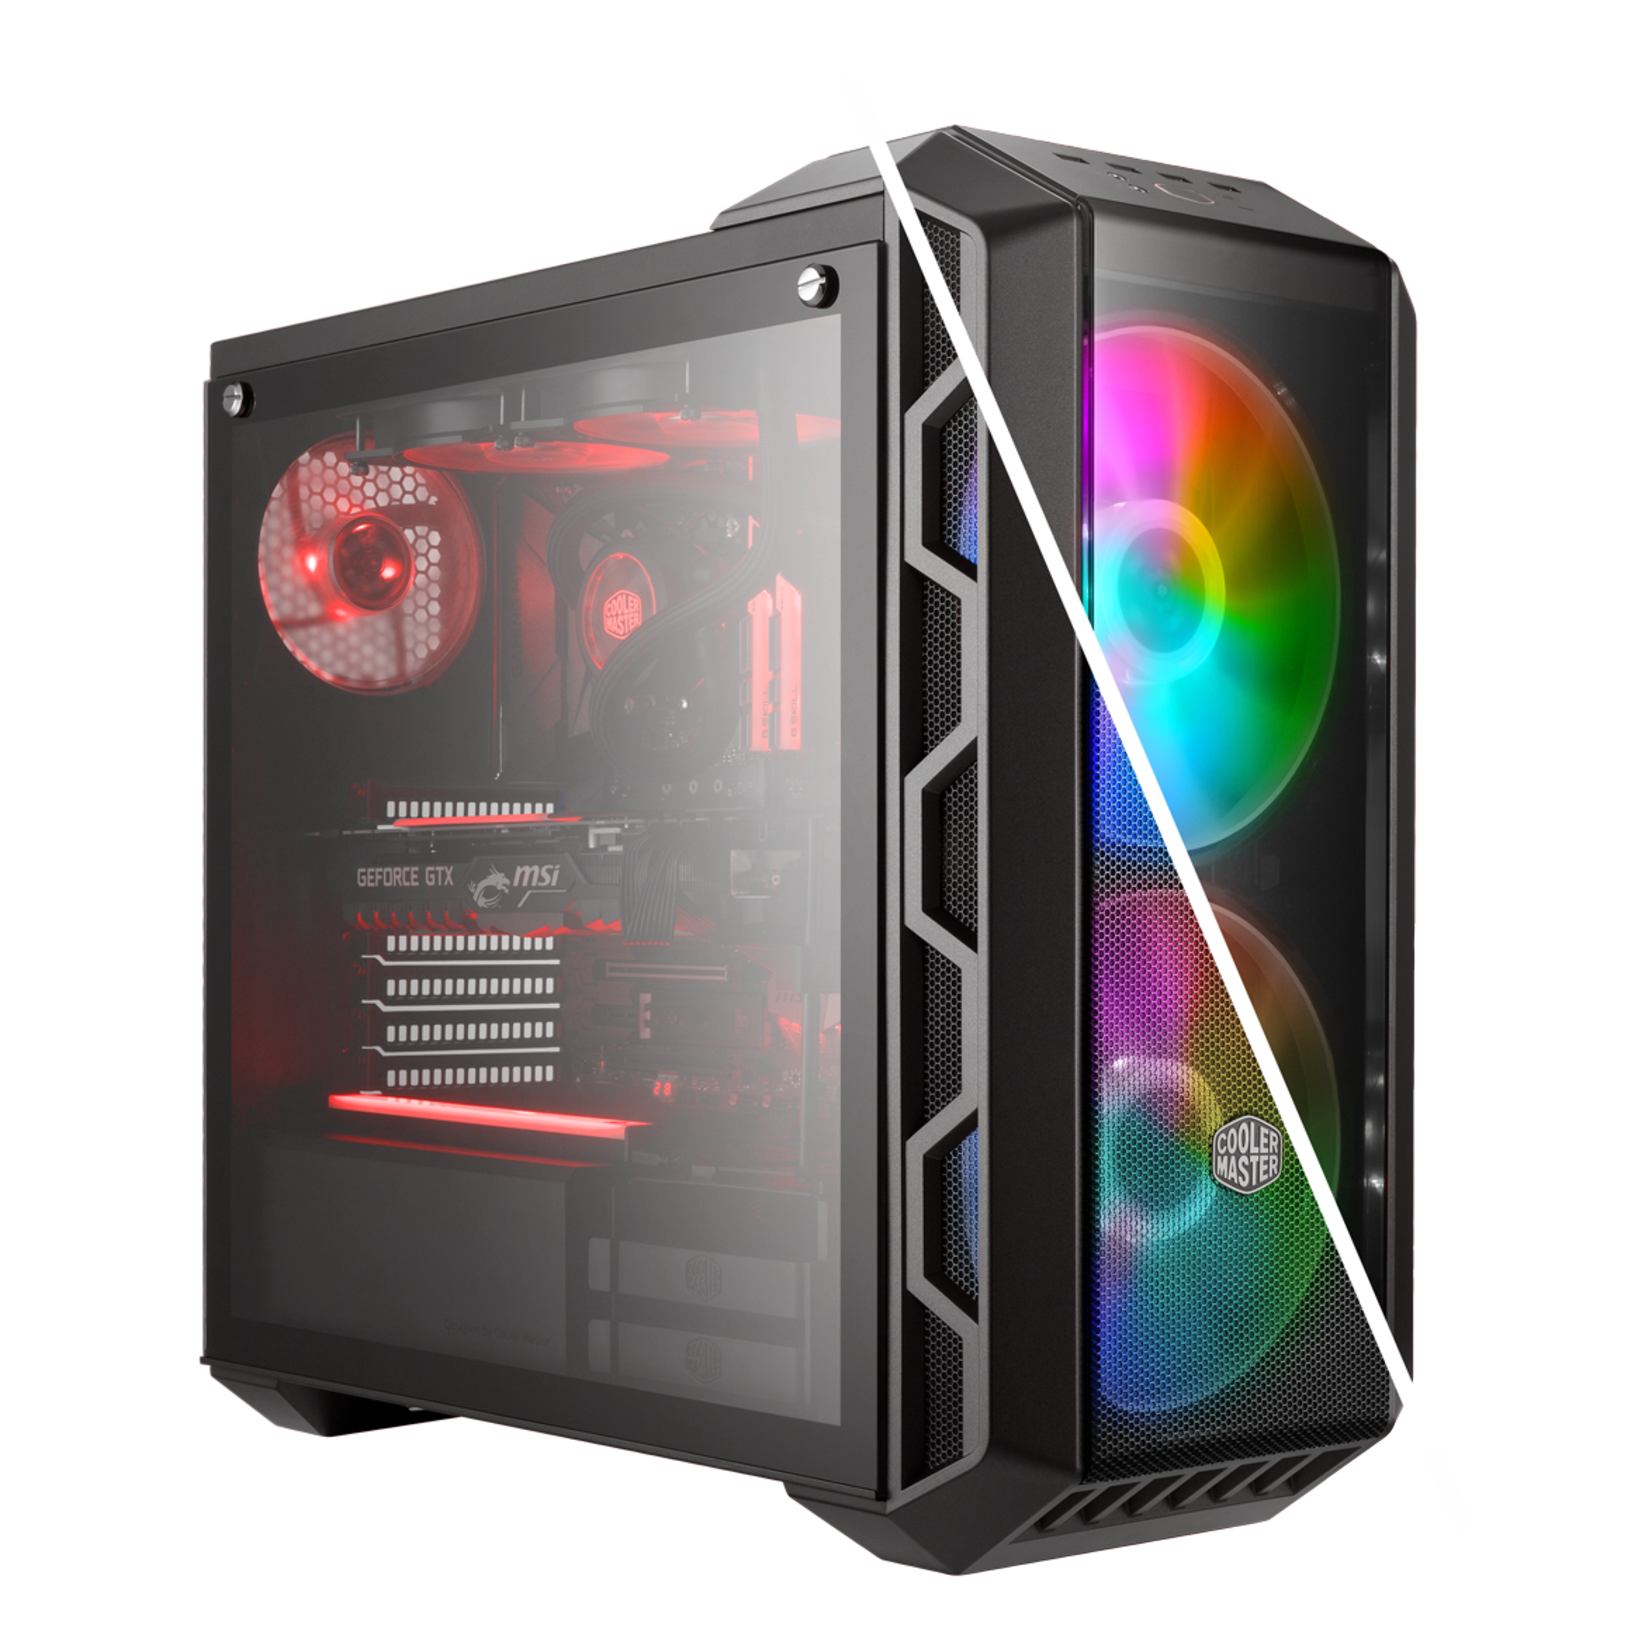 COOLER MASTER Cooler Master MasterCase H500 ARGB Airflow ATX Mid-Tower with Mesh & Transparent Front Panel Option, 2 x 200mm ARGB Fans, and a Tempered Glass Side Panel